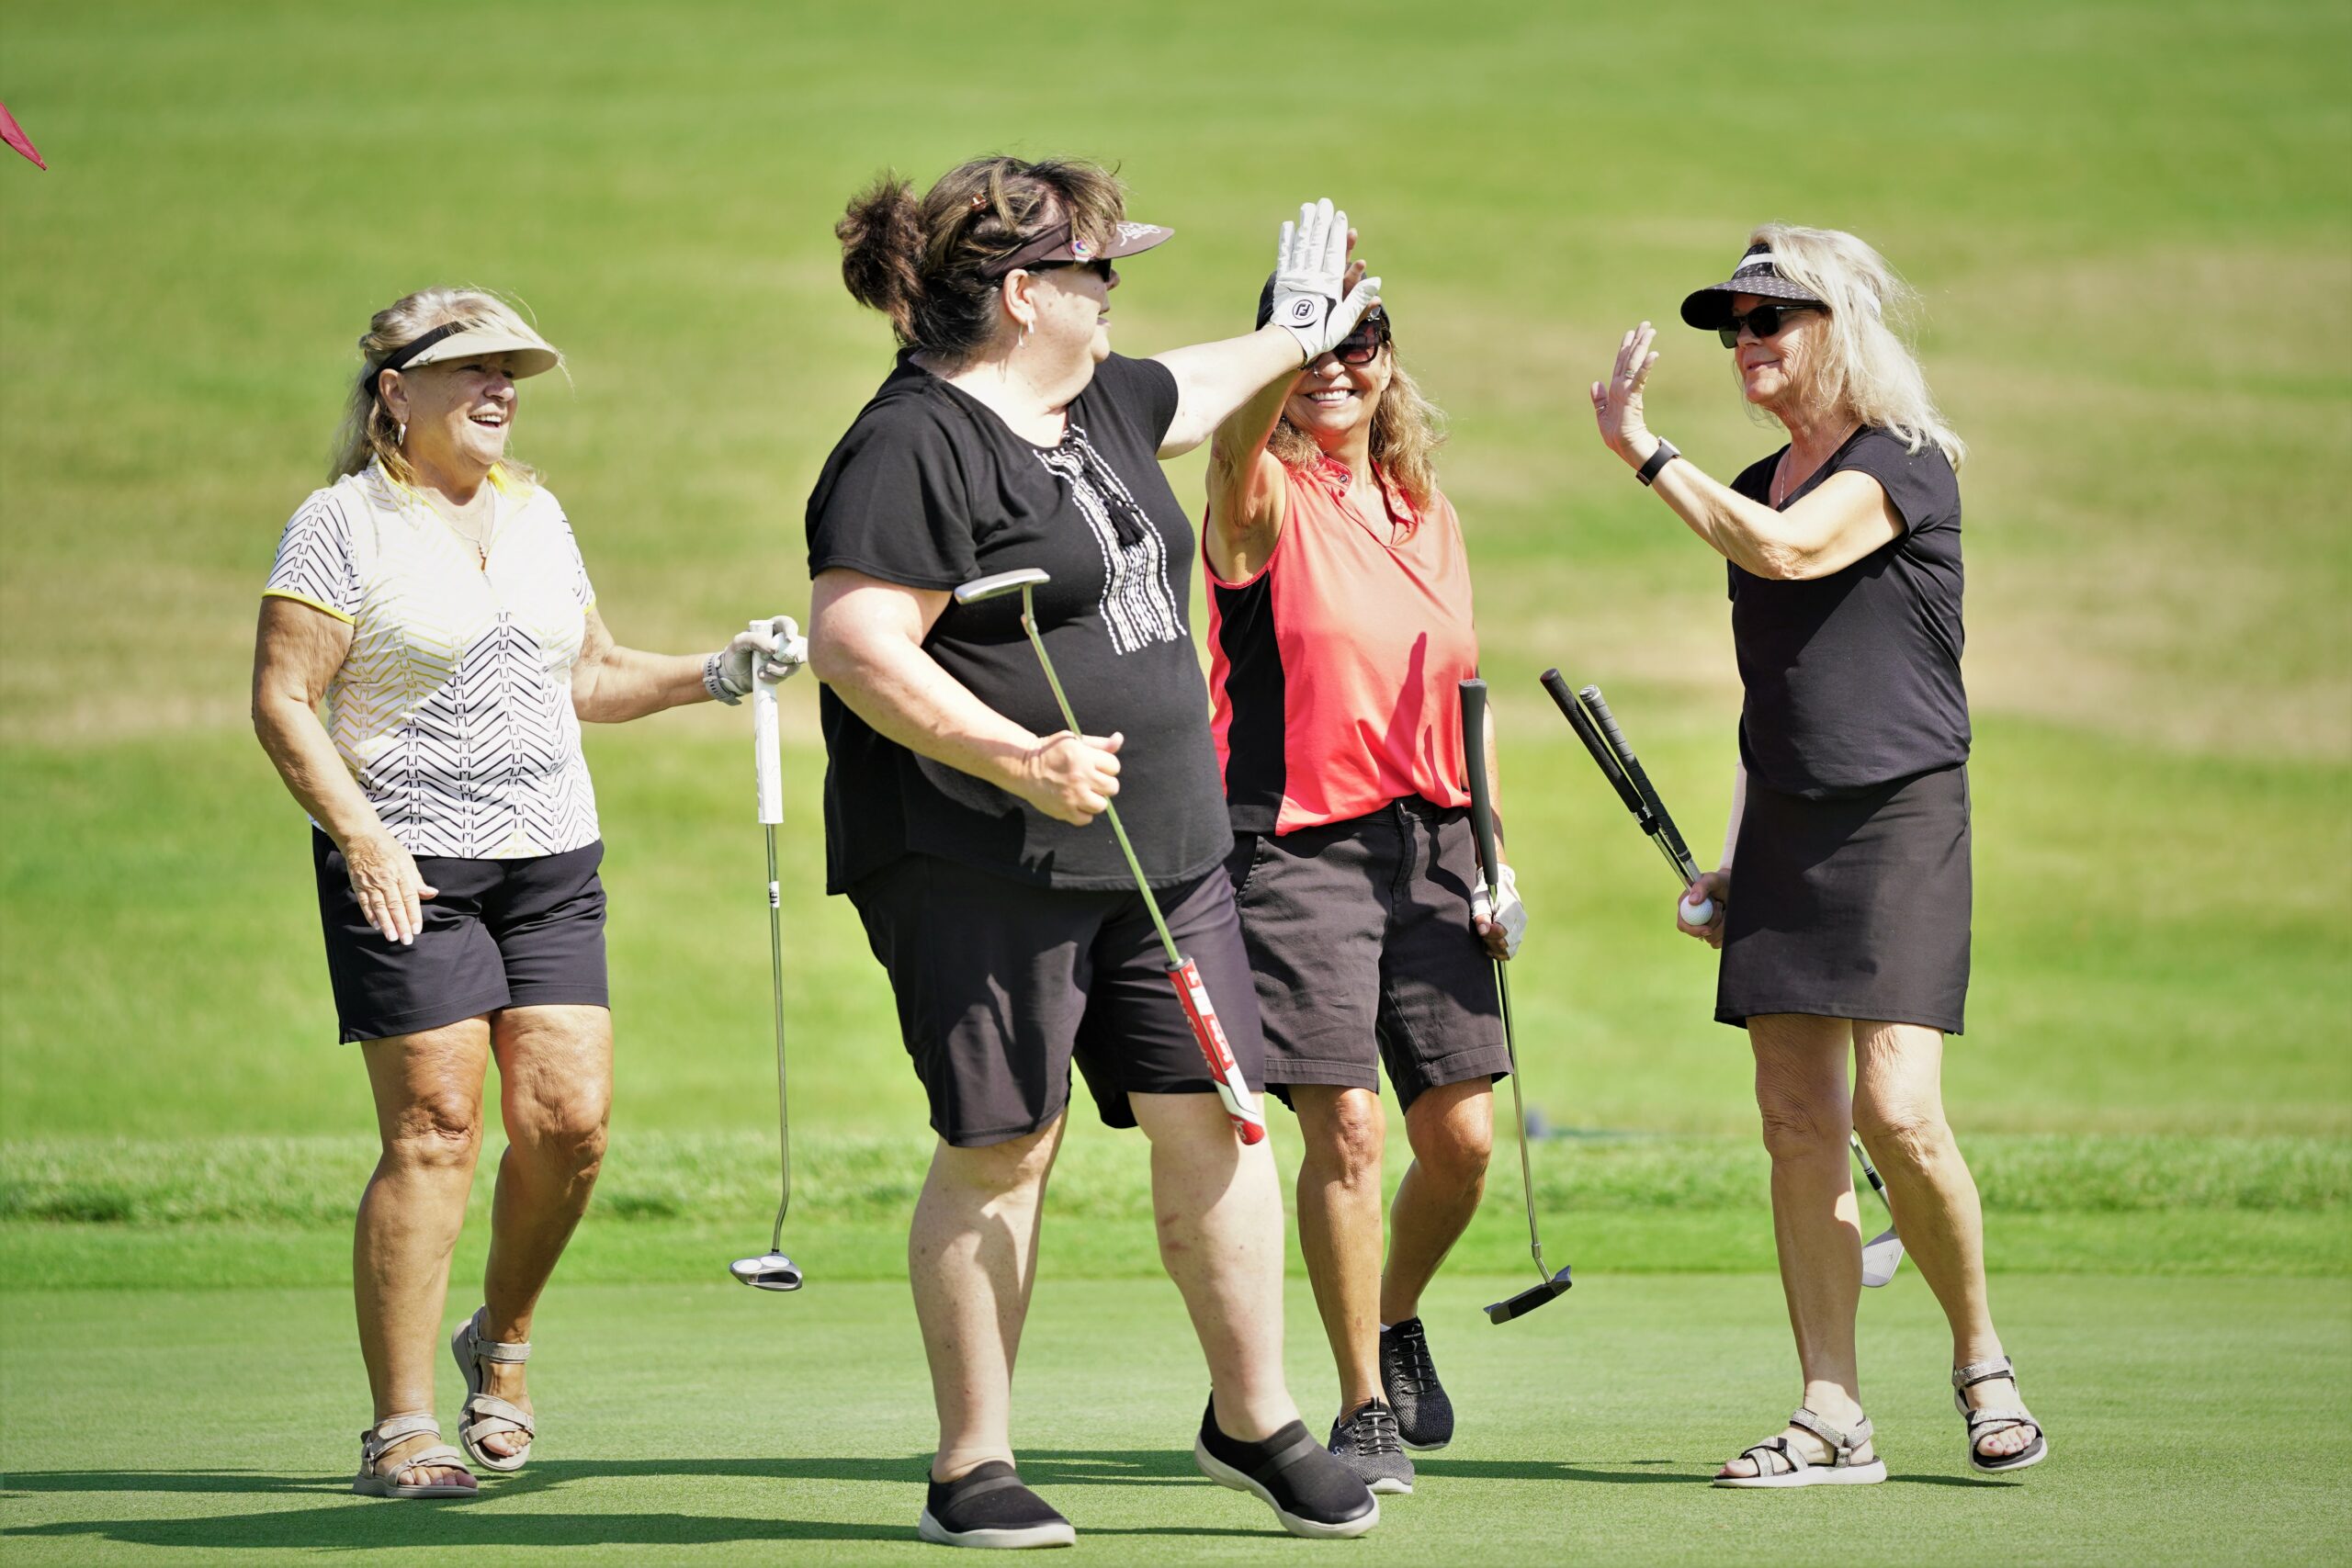 A group celebrates sinking a putt on No. 18 during the Howe-Welle Women's Athletics Golf Tournament on Friday, Aug. 25, 2023, at the Bemidji Town and Country Club. (Micah Friez / Bemidji State)